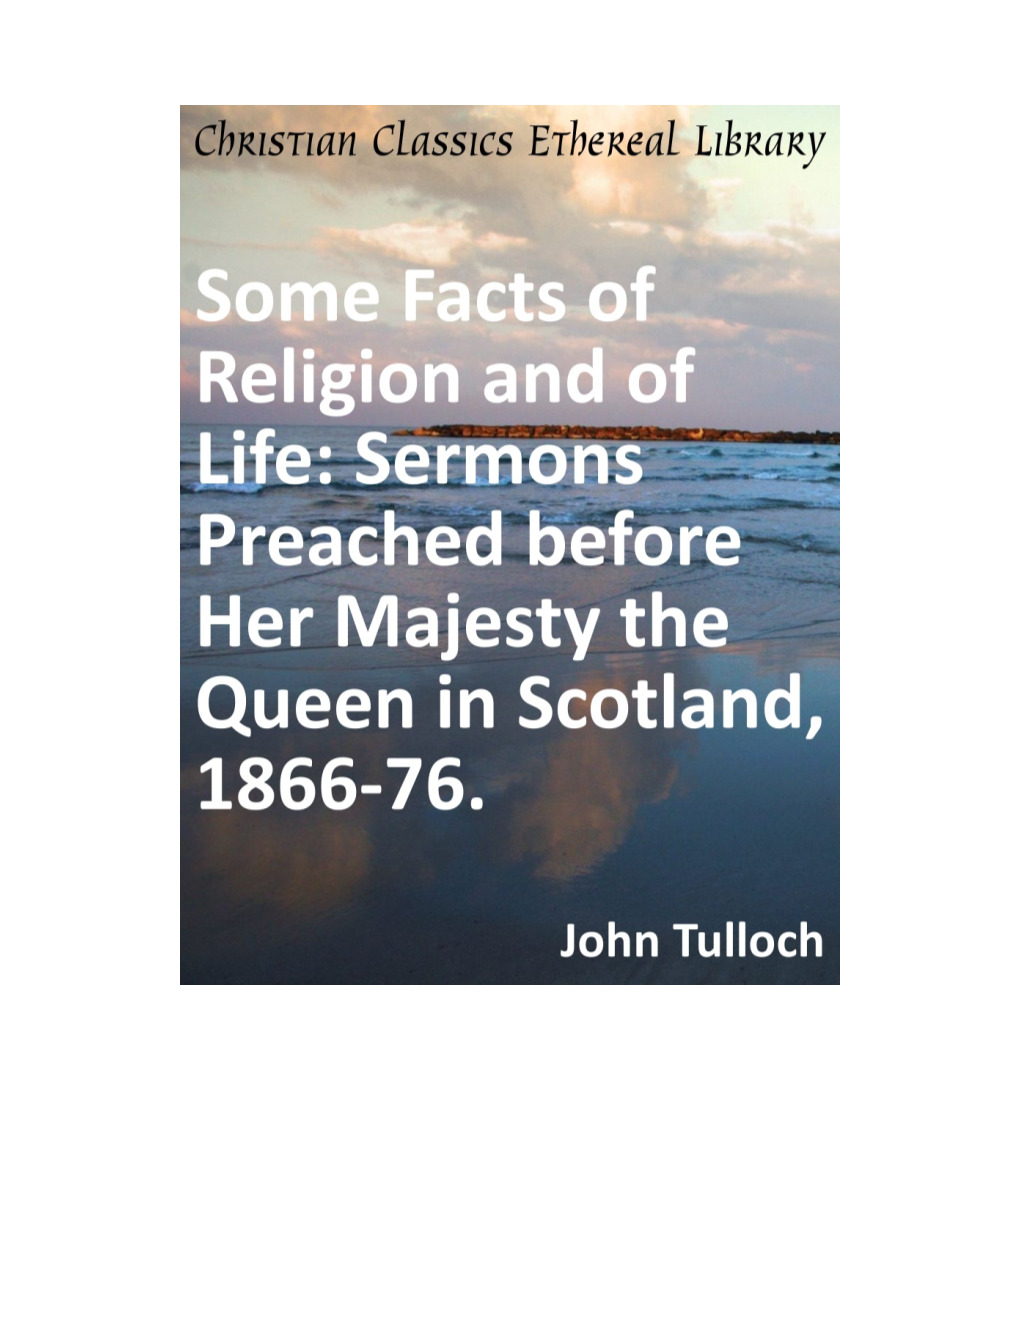 Some Facts of Religion and of Life: Sermons Preached Before Her Majesty the Queen in Scot- Land, 1866-76